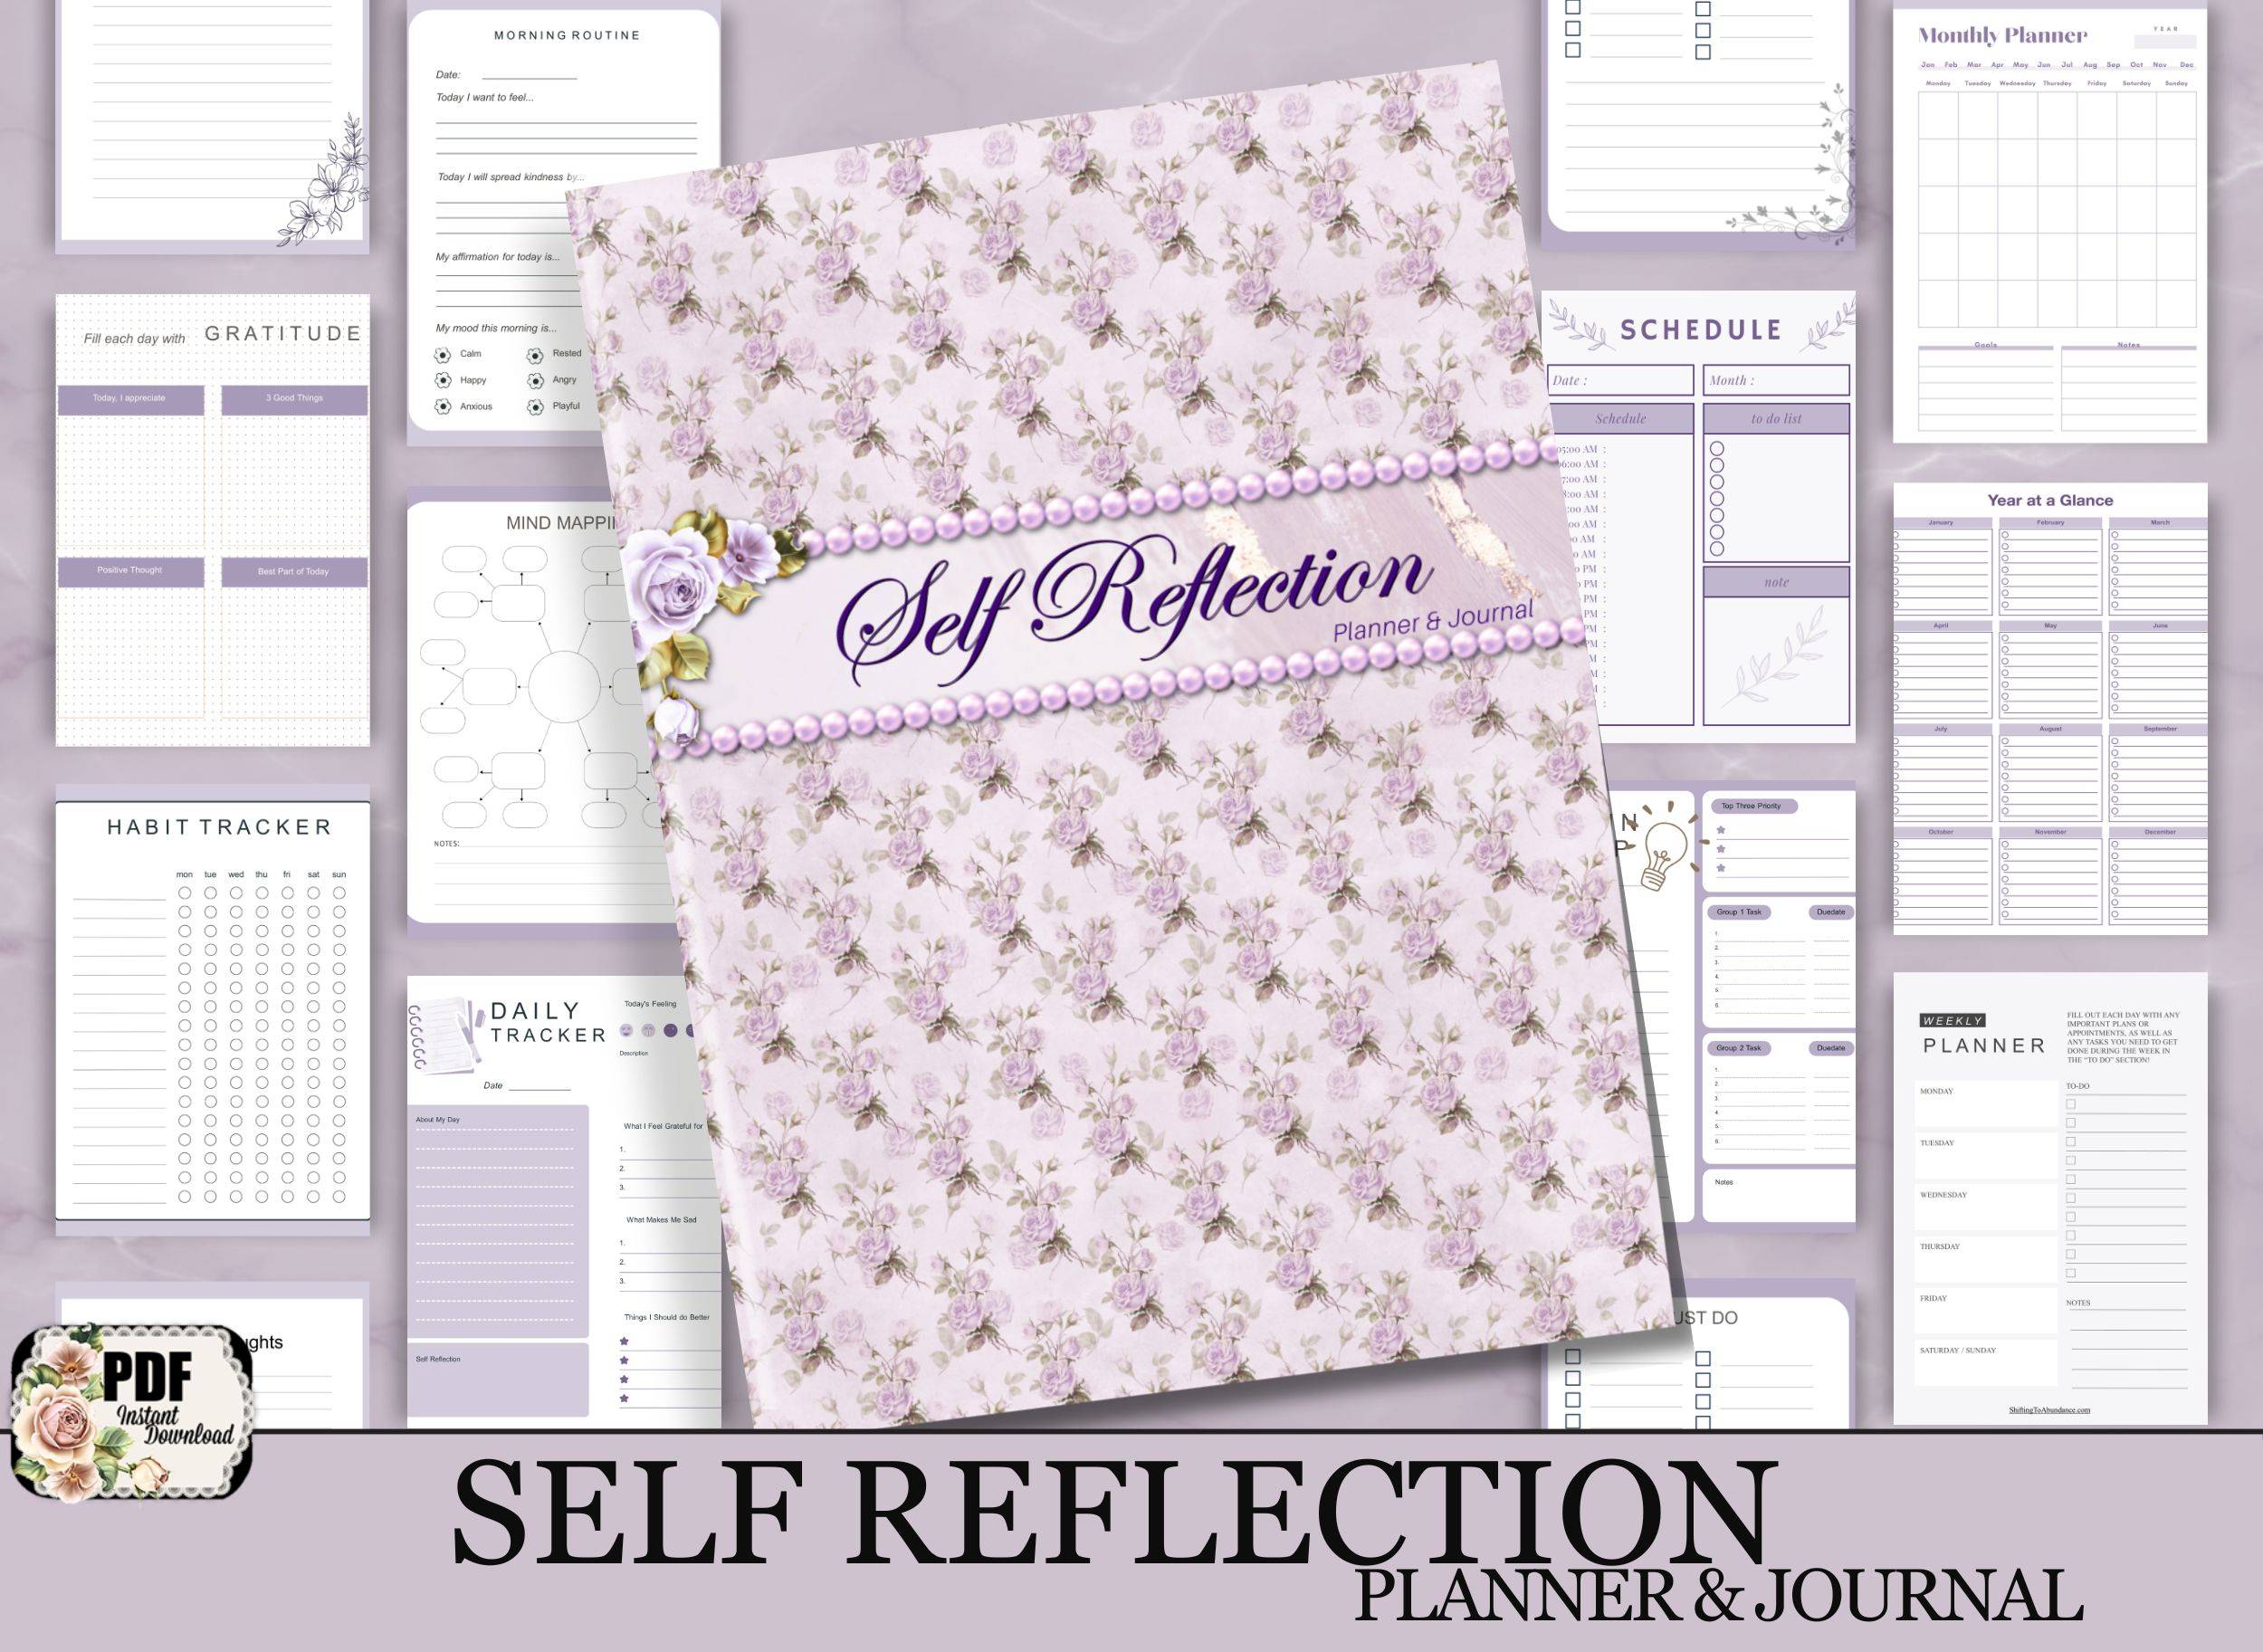 self reflection planner and journal lavender floral print cover and interior pages